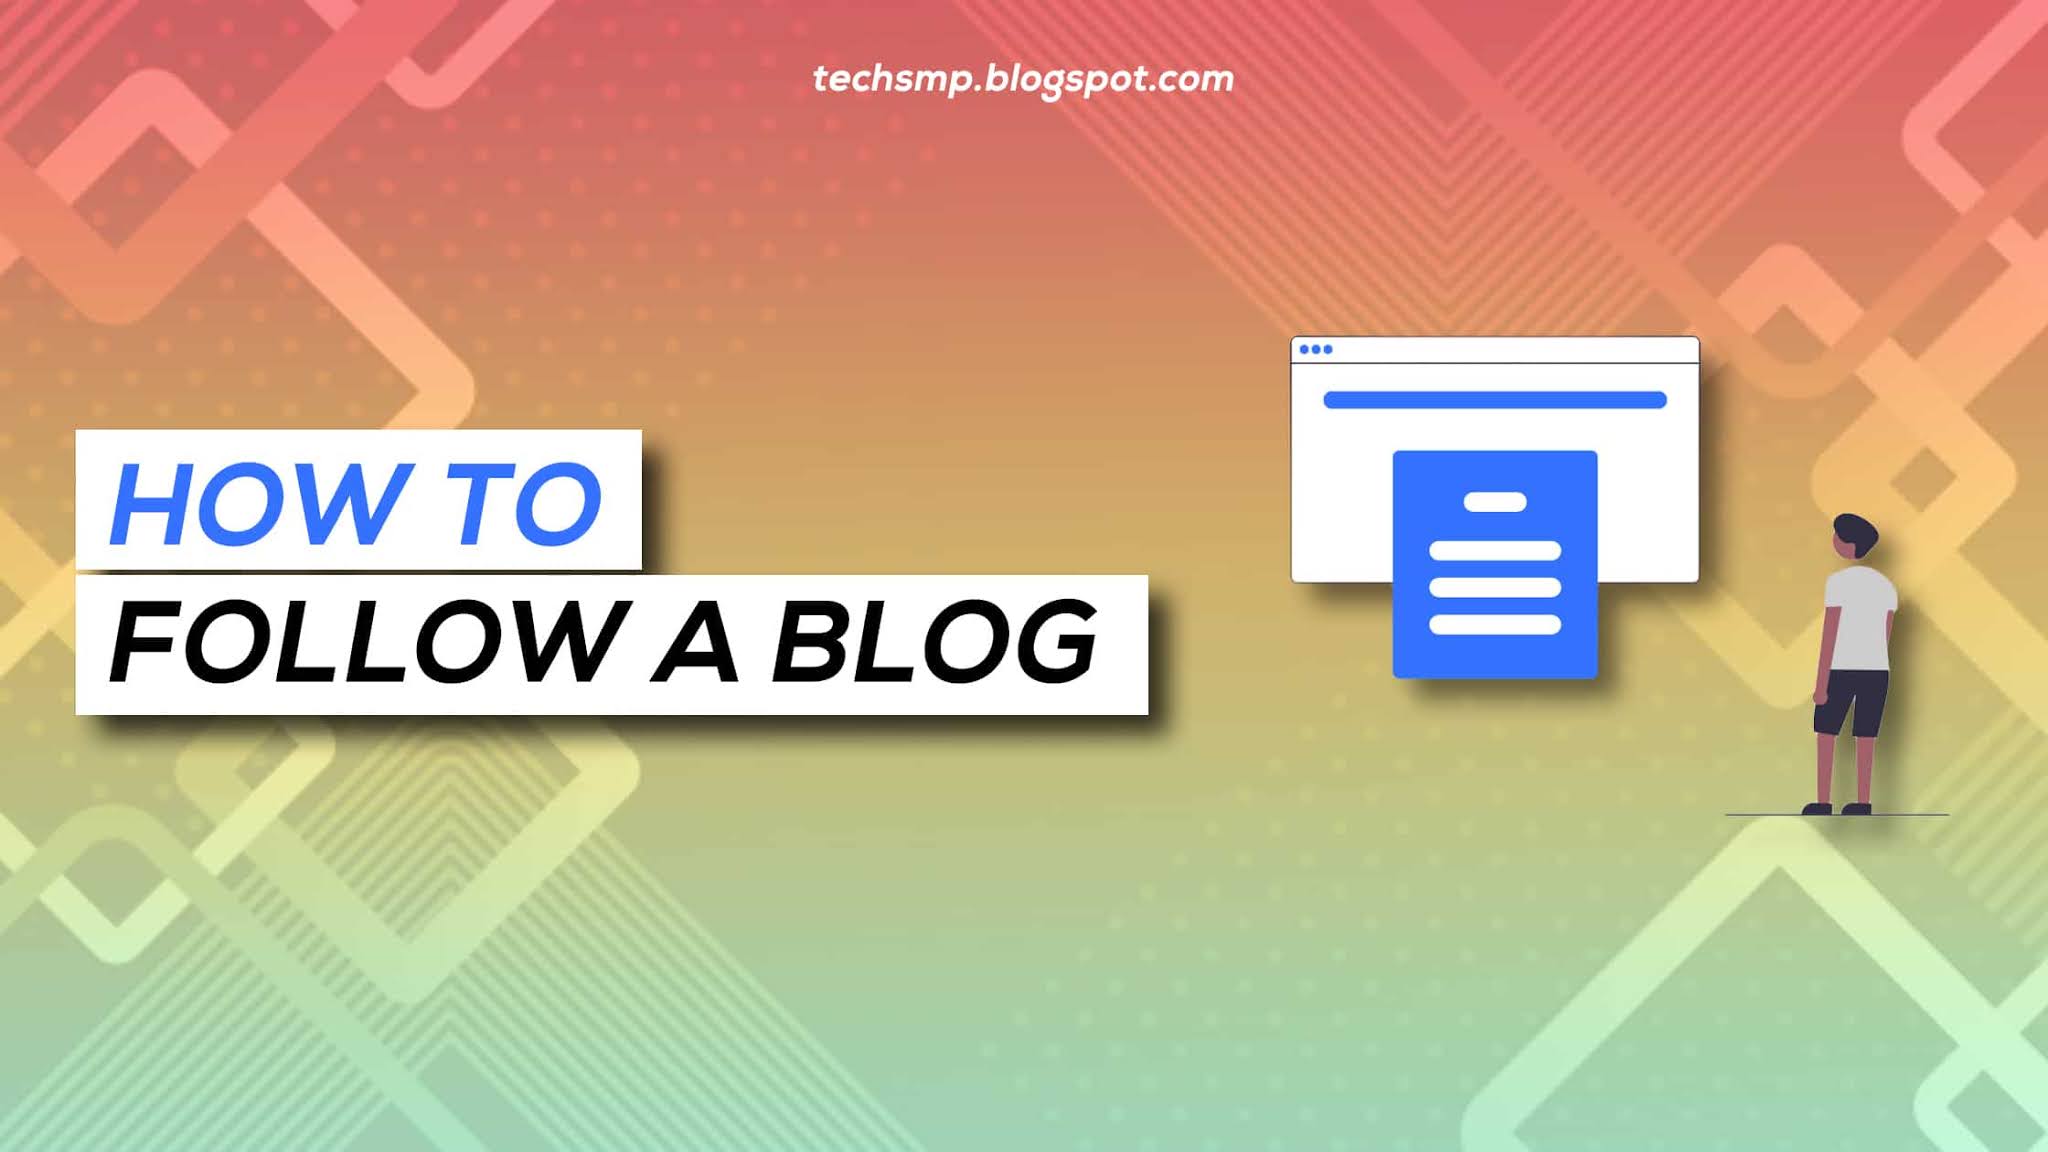 How to Follow a Blog